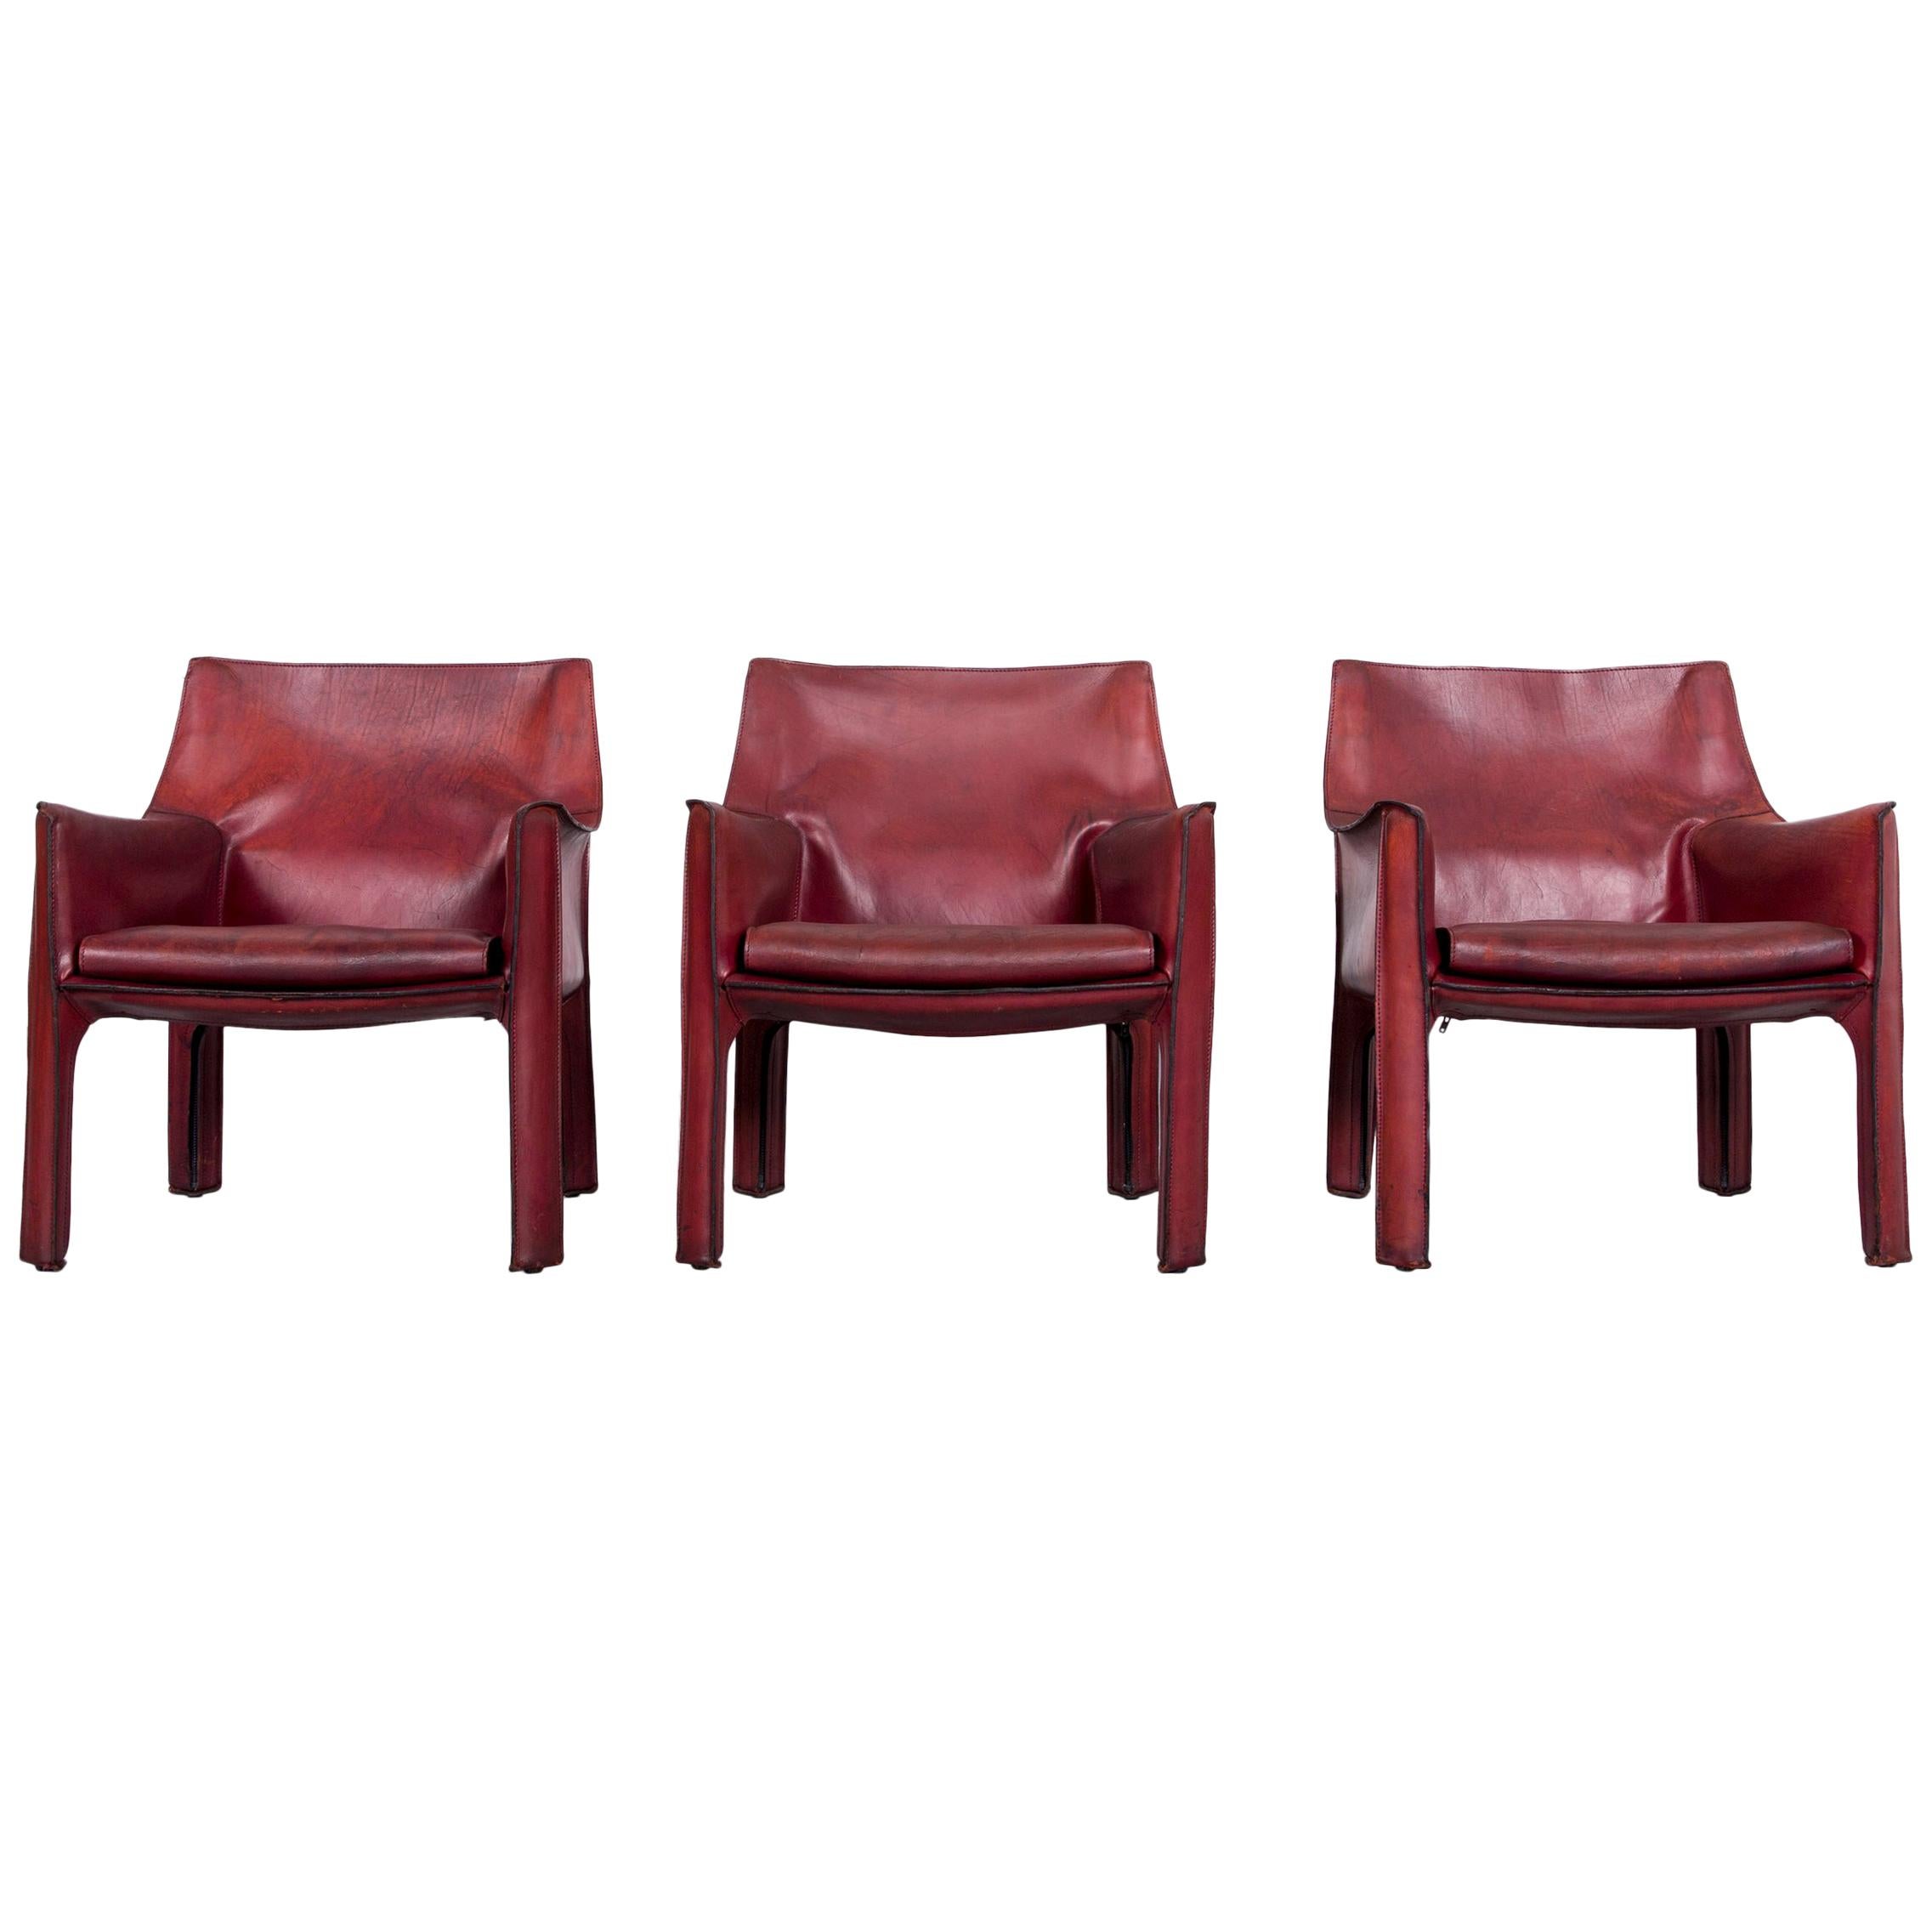 Cassina Cab 414 Vintage Leather Armchair Set Red by Mario Belinni 1970-1979